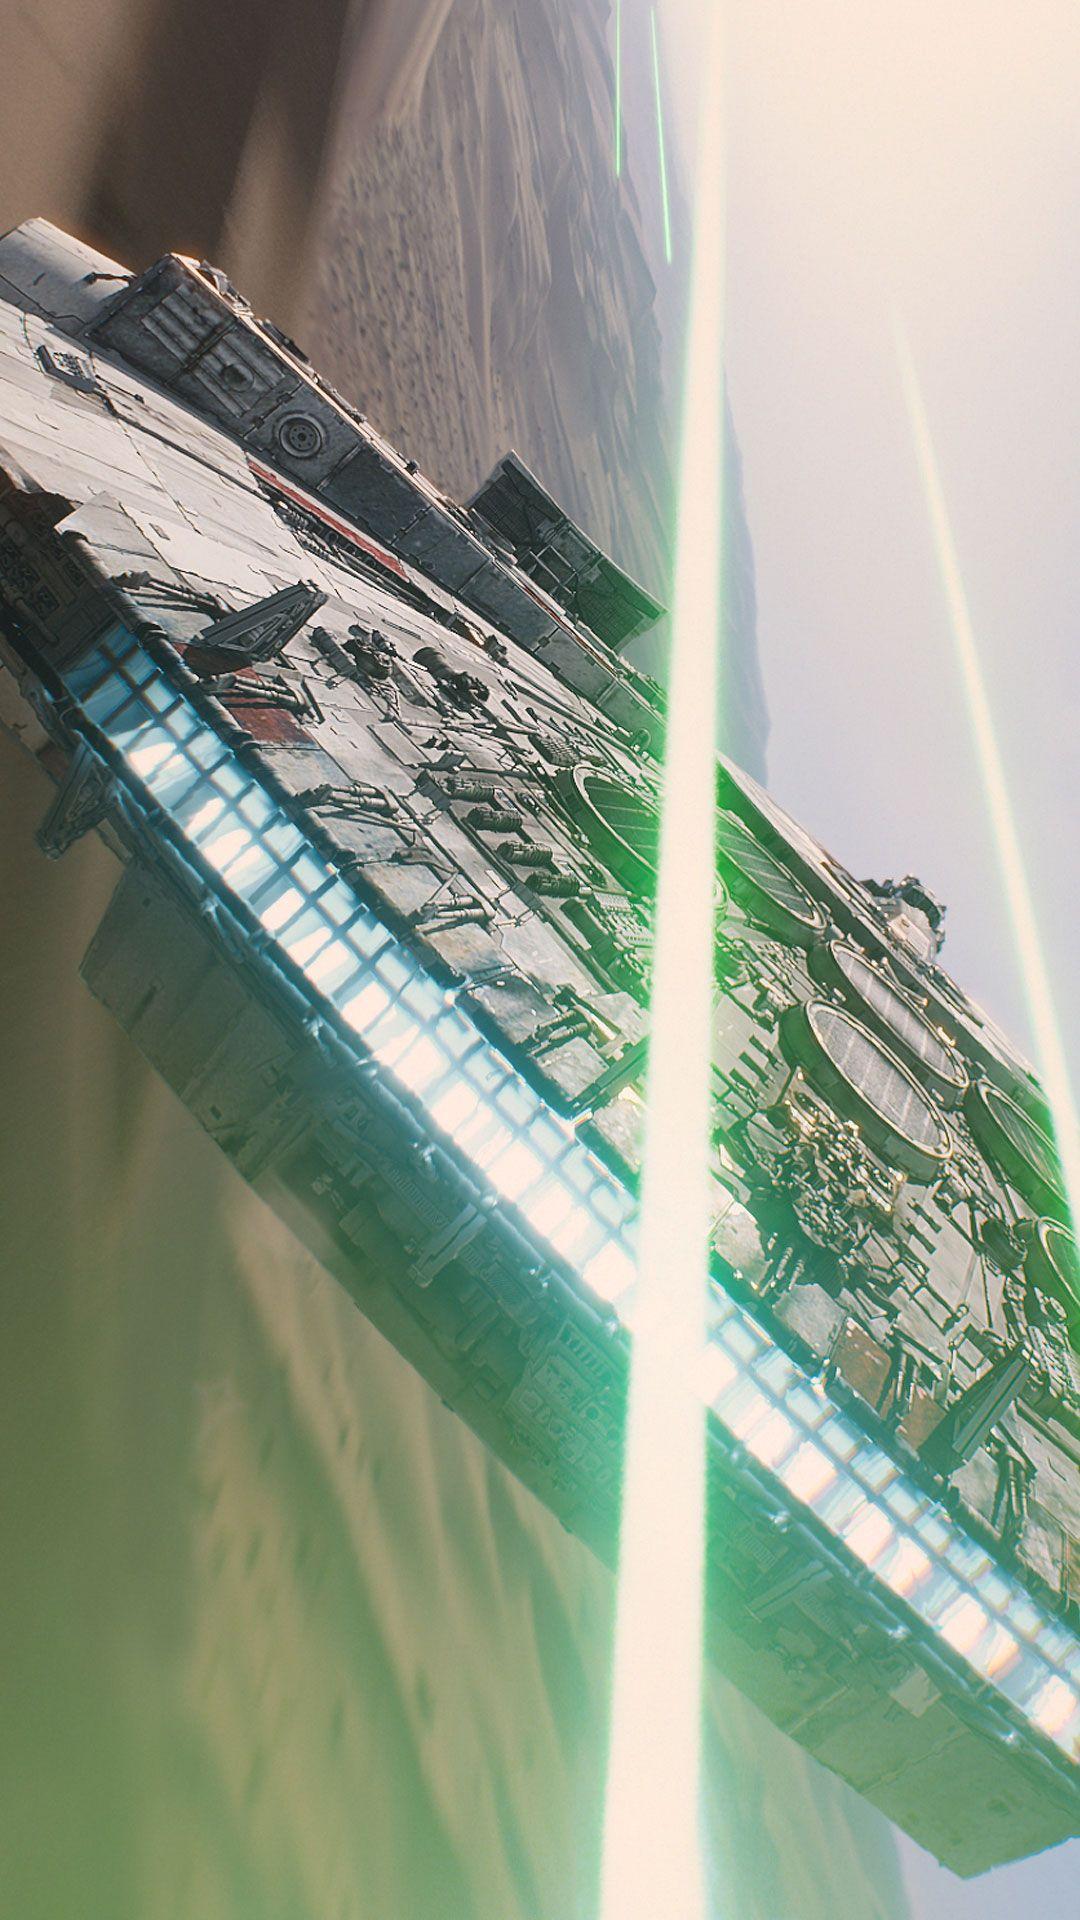 Star Wars: The Force Awakens HD image released